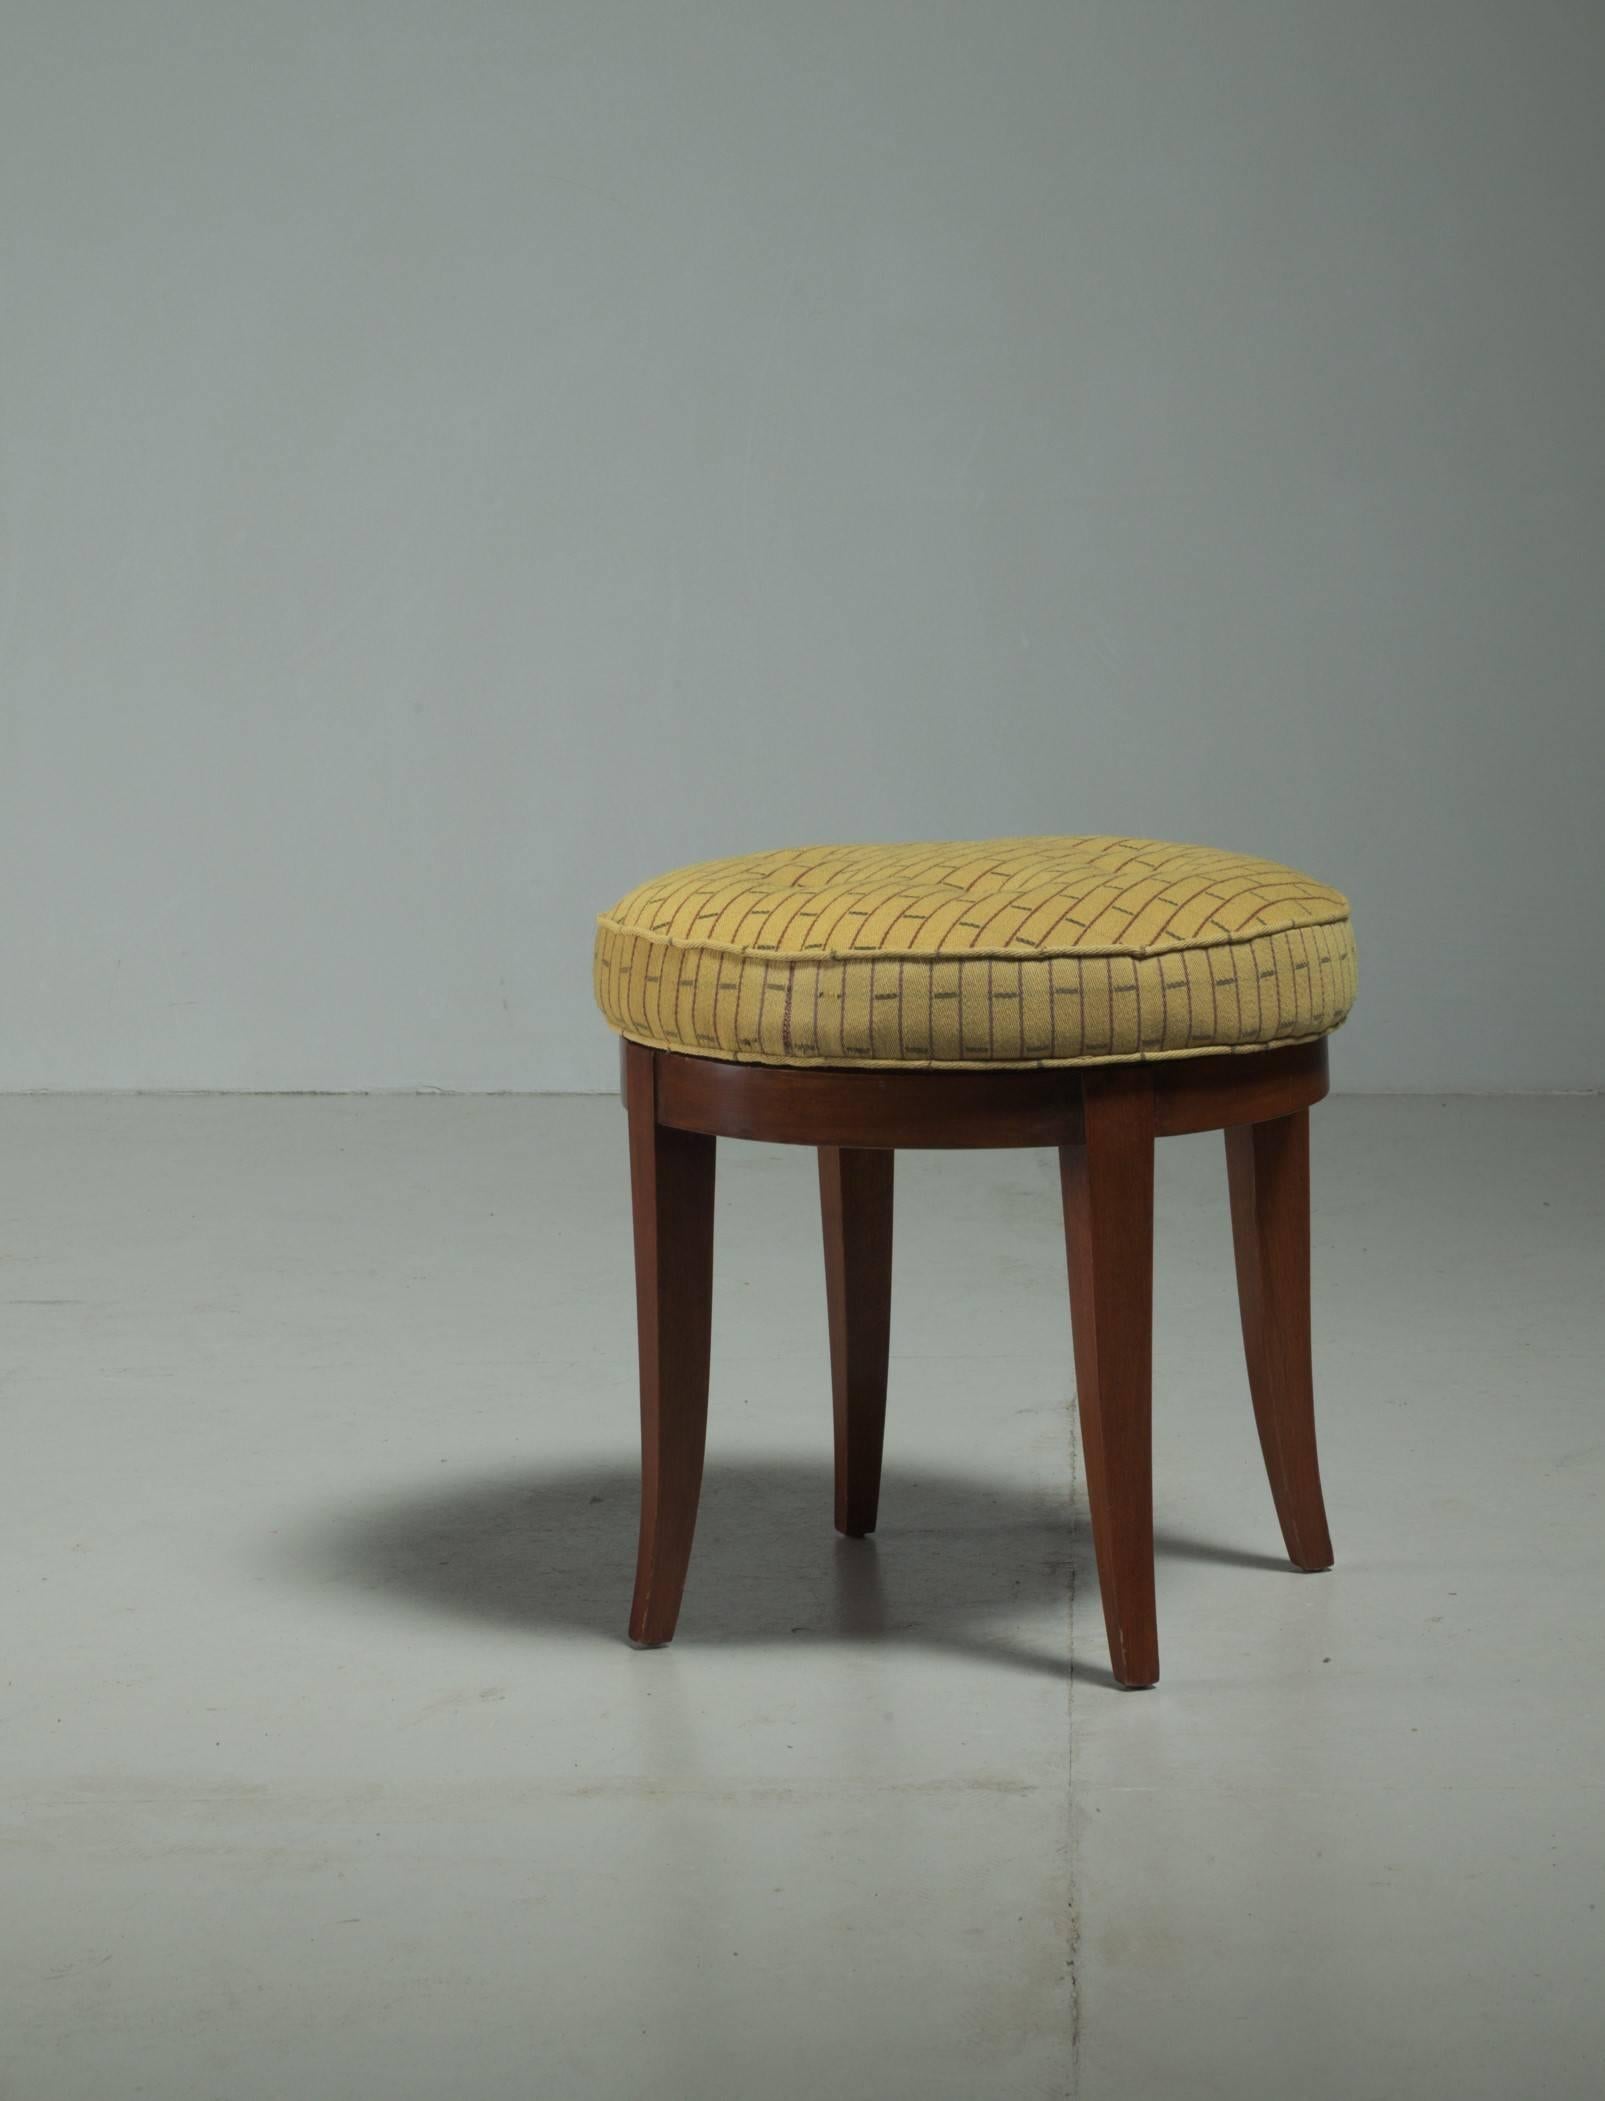 A rare oak, custom-made Paul Frankl swivel stool from a Los Angeles Interior by Frankl, which was documented in a House Beautiful magazine in 1945. The stool has been refinished and reupholstered with a yellow patterned fabric and the filling has